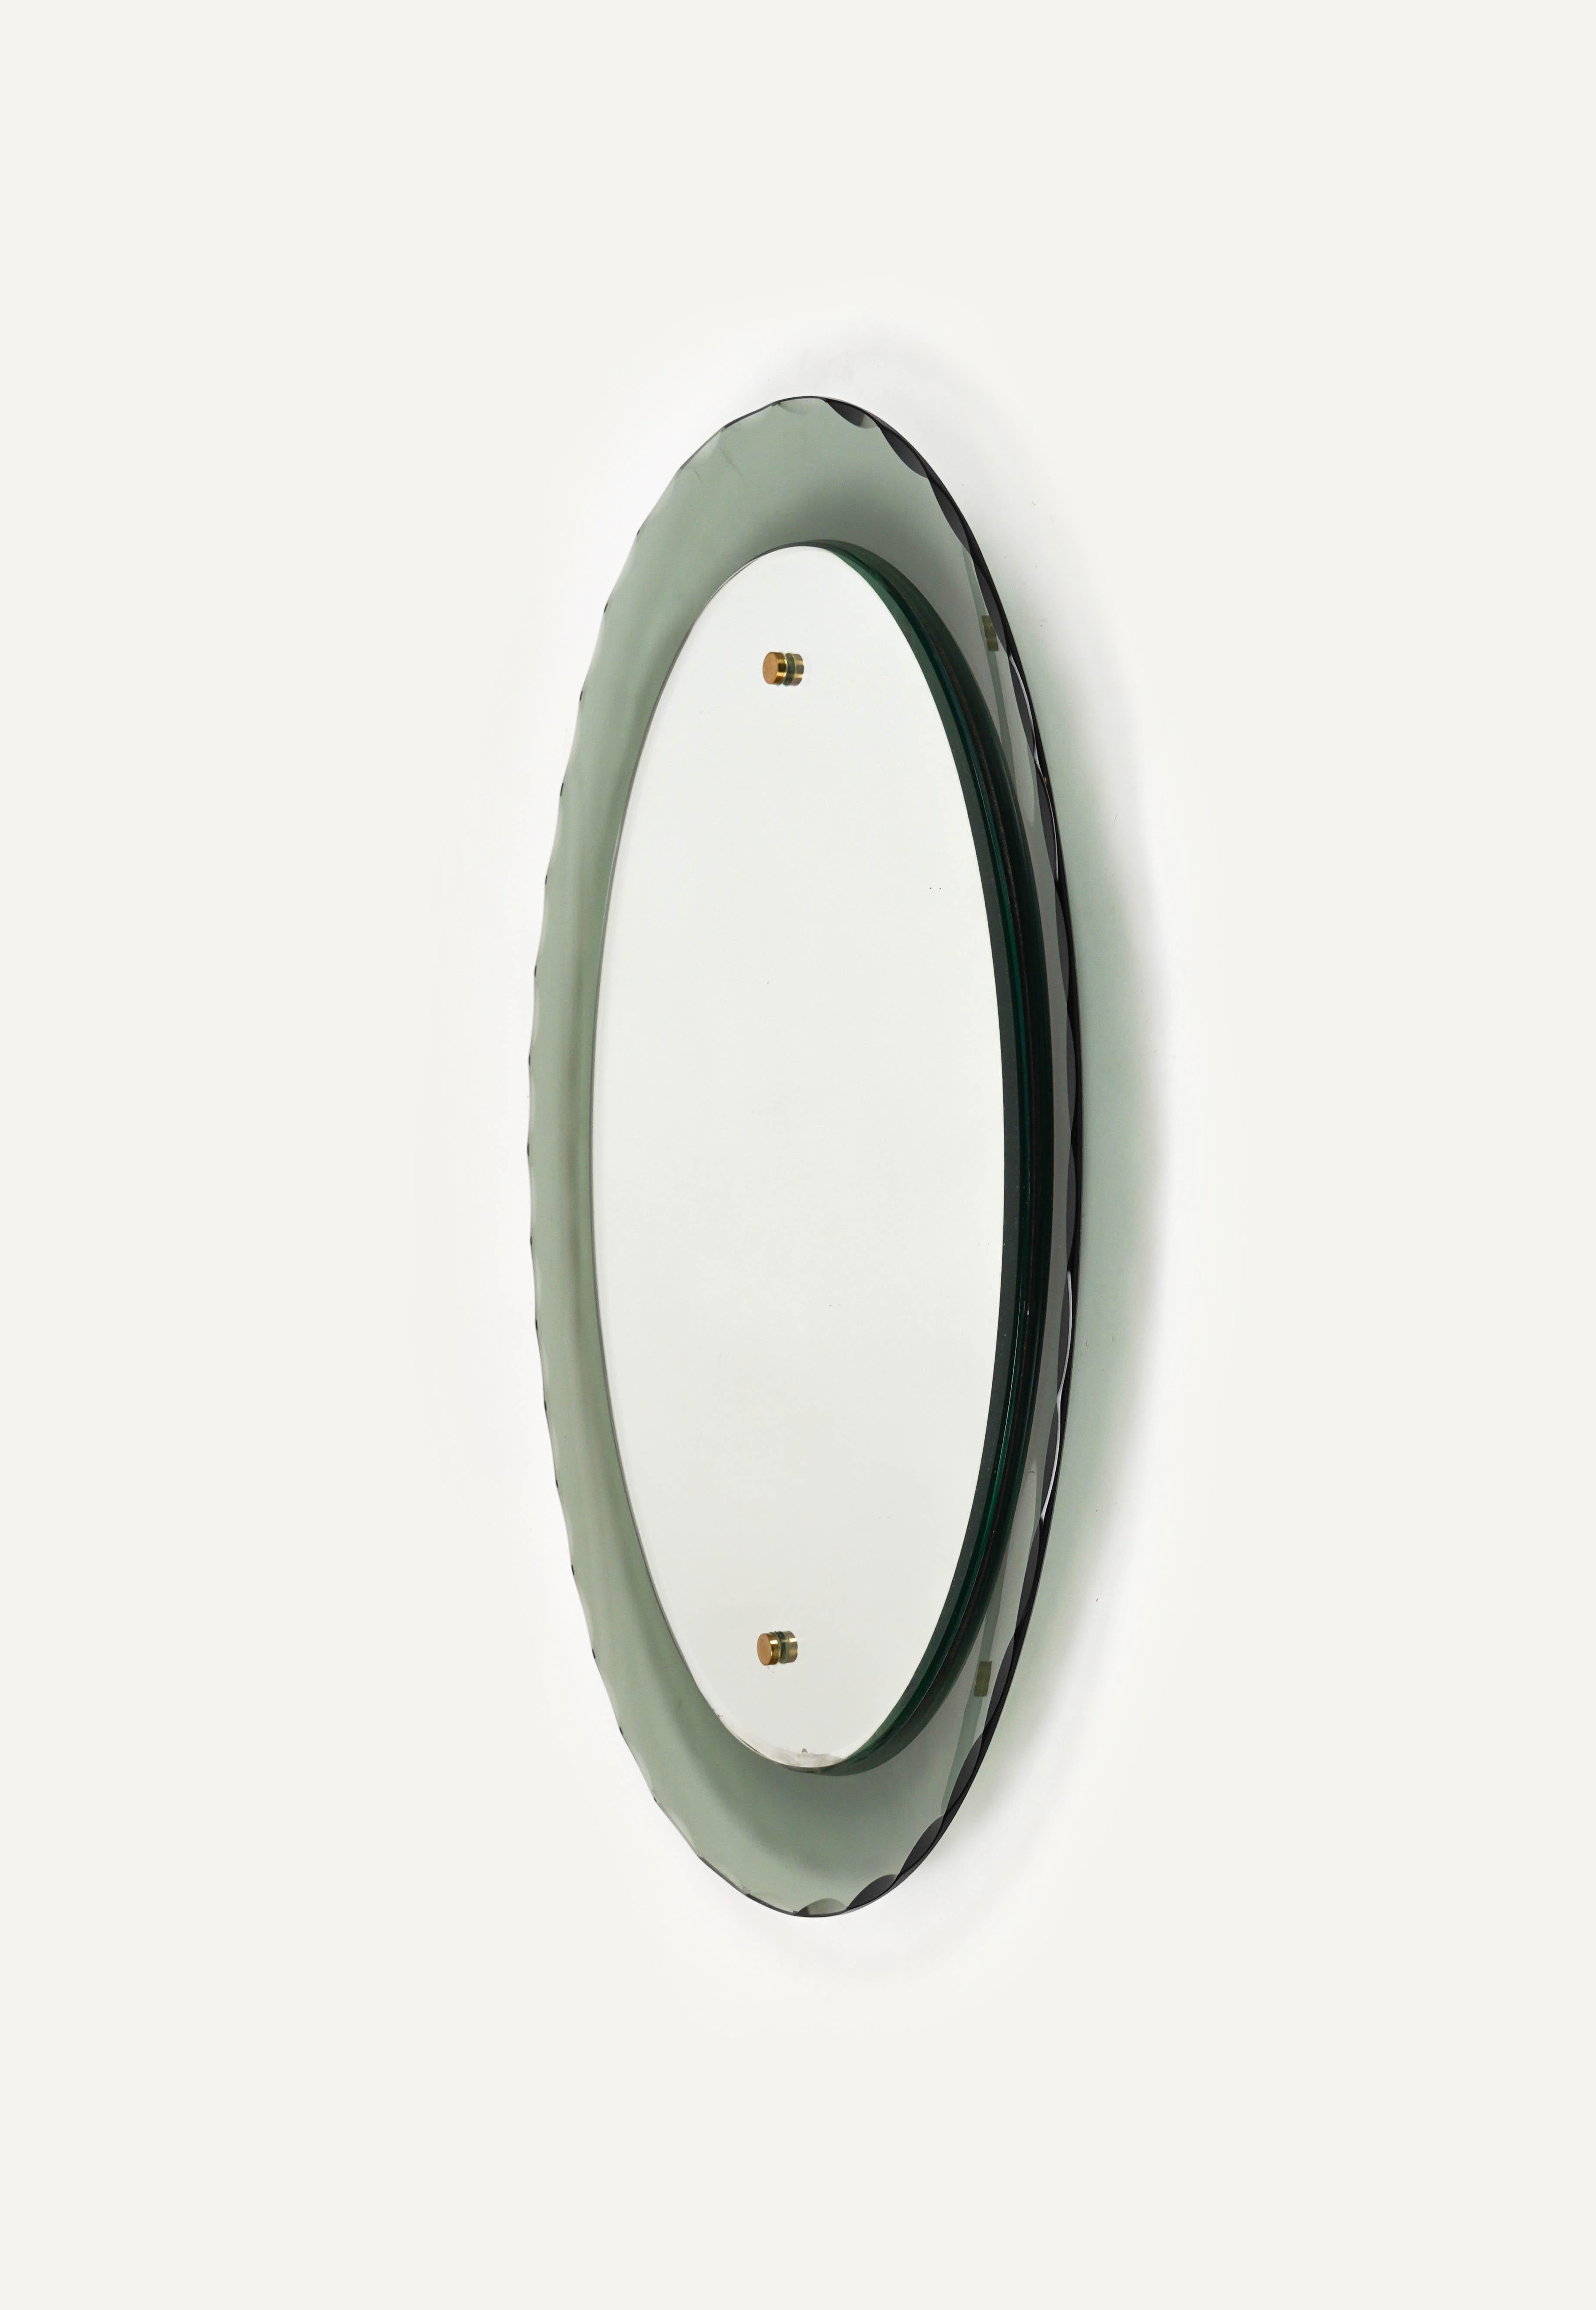 Midcentury Oval Wall Mirror whit Smoked Glass Frame by Cristal Arte, Italy 1960s For Sale 6